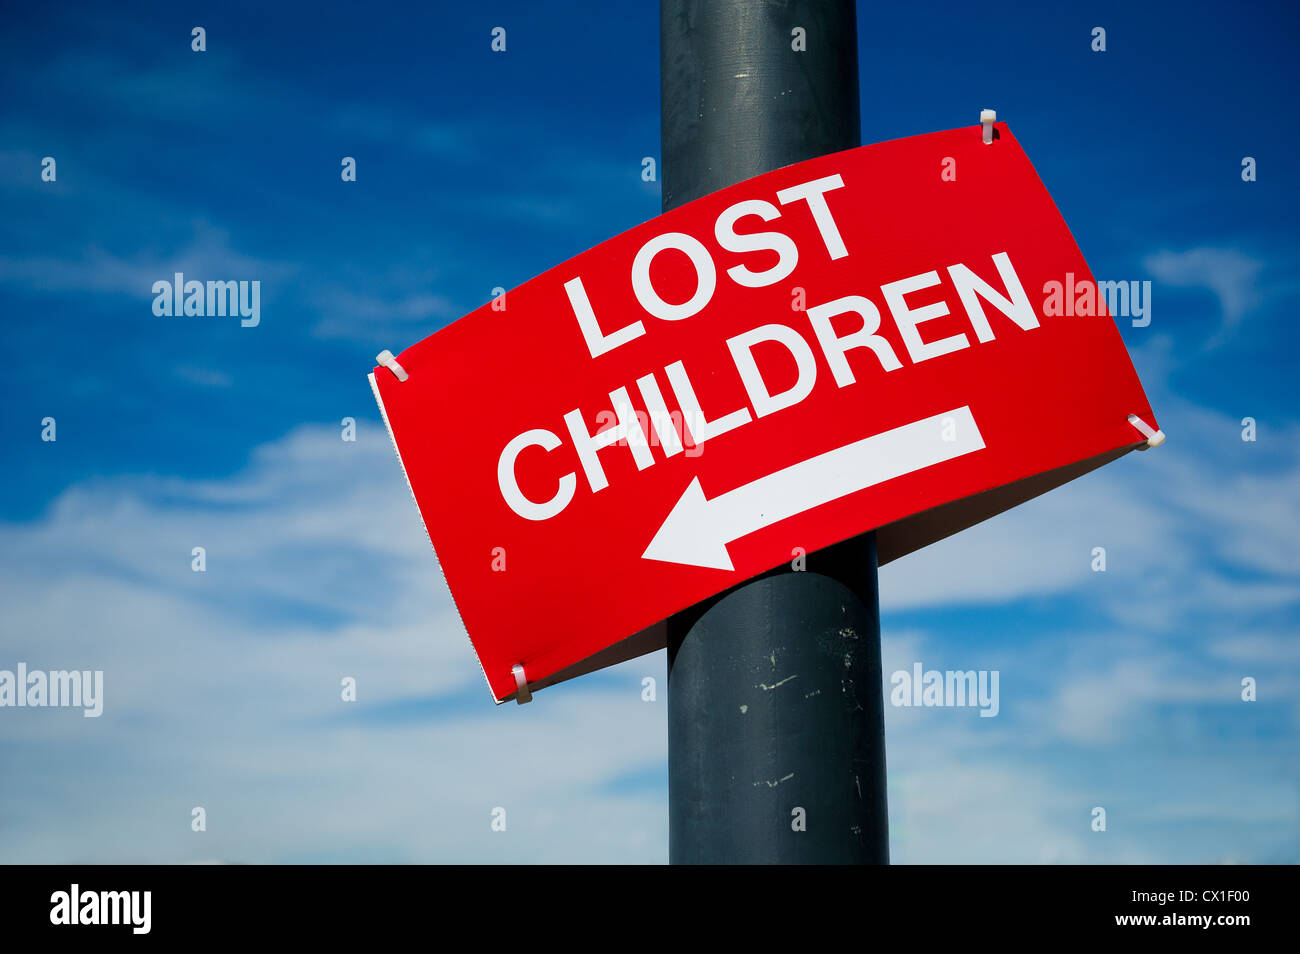 A sign for Lost Children. Stock Photo